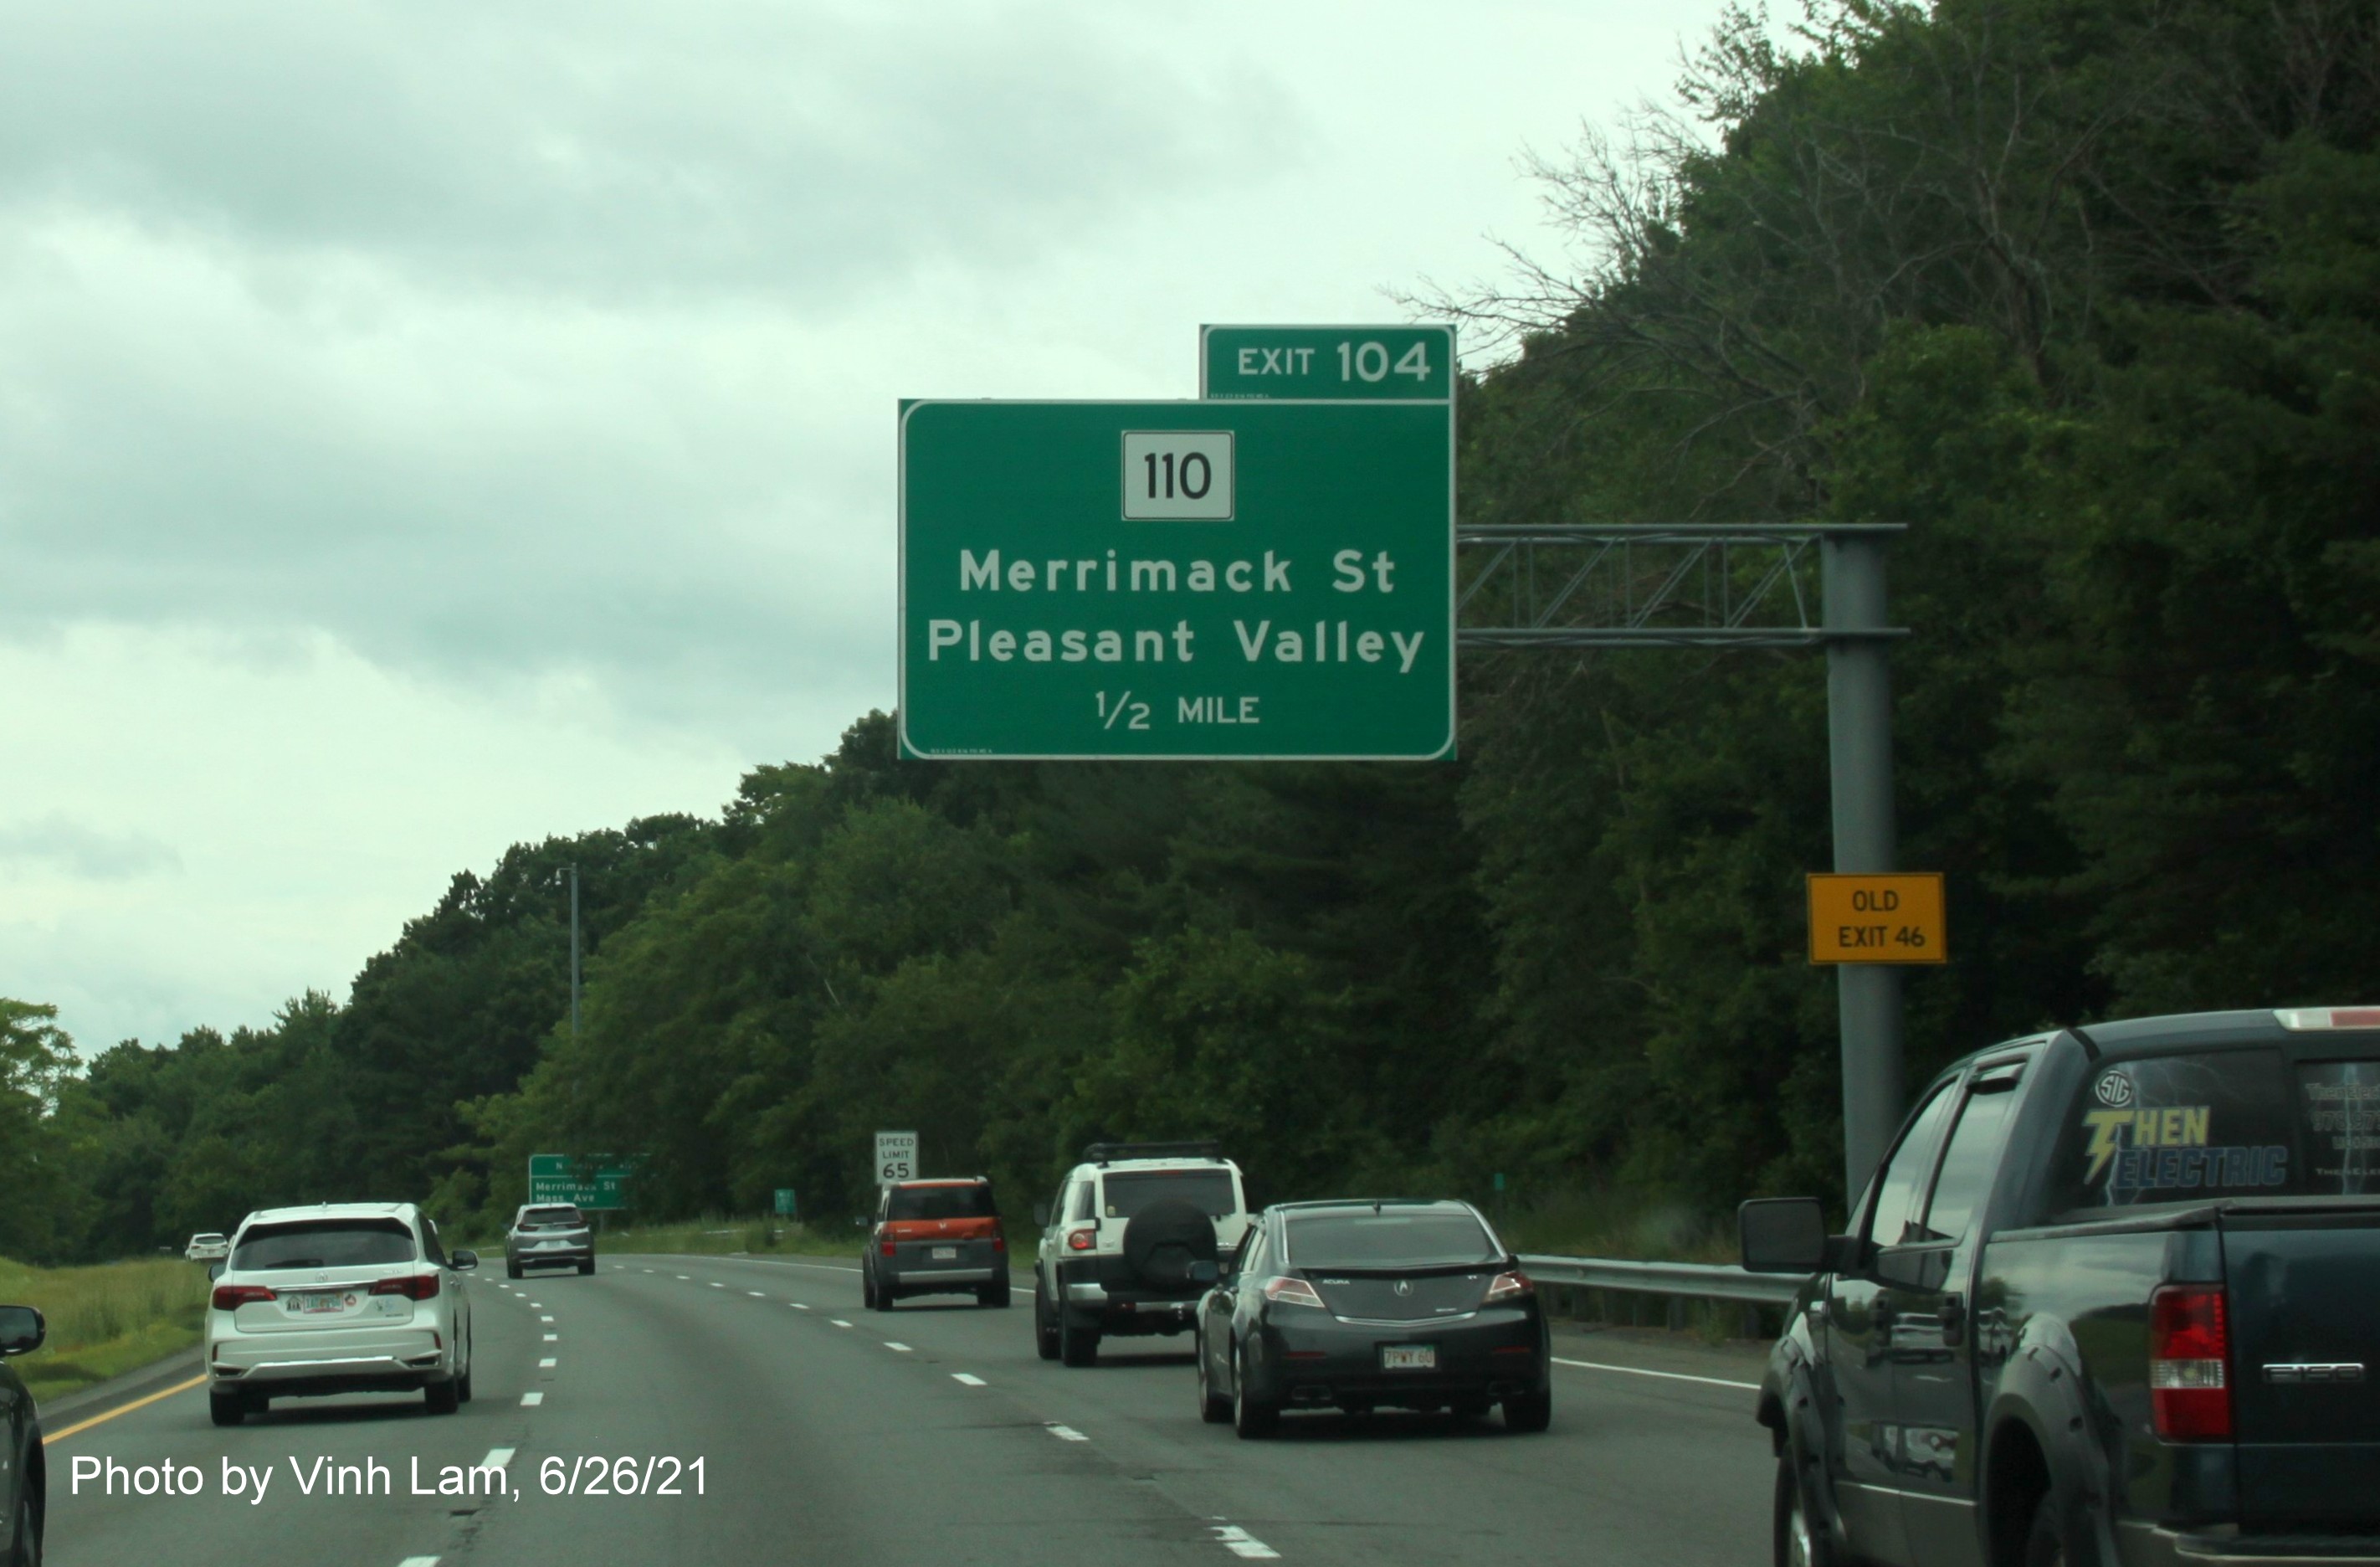 Image of 1/2 mile advance sign for MA 110 exit with new milepost based exit number and yellow Old Exit 46 advisory sign on support on I-495 South in Lawrence, photo by Vinh Lam, June 2021